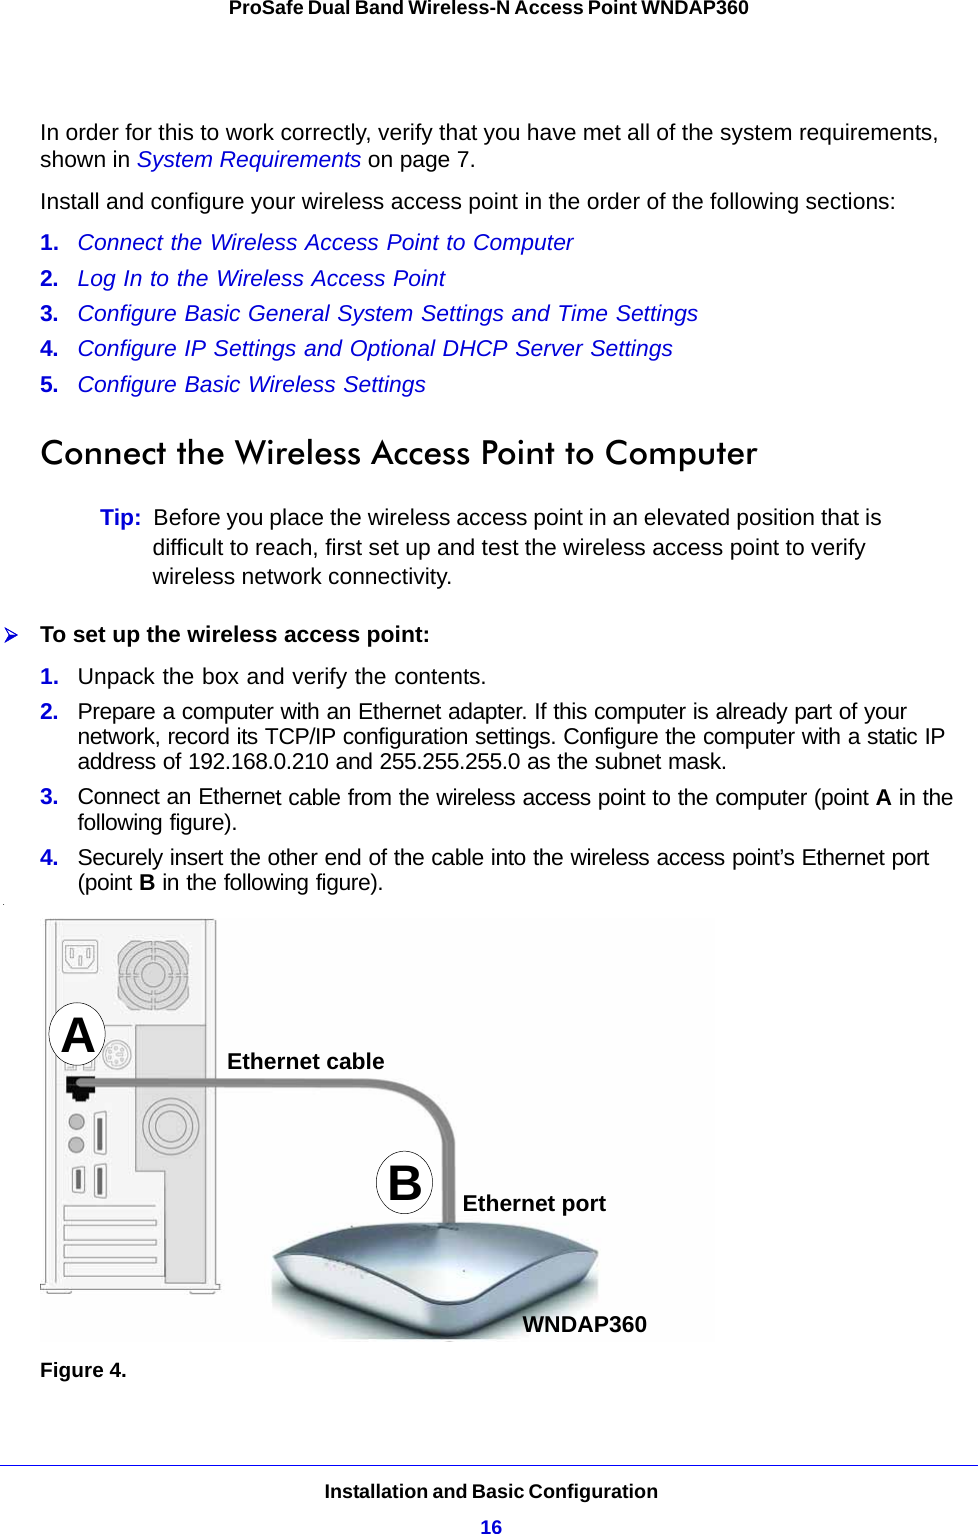 Installation and Basic Configuration16ProSafe Dual Band Wireless-N Access Point WNDAP360 In order for this to work correctly, verify that you have met all of the system requirements, shown in System Requirements on page 7.Install and configure your wireless access point in the order of the following sections:1.  Connect the Wireless Access Point to Computer 2.  Log In to the Wireless Access Point 3.  Configure Basic General System Settings and Time Settings 4.  Configure IP Settings and Optional DHCP Server Settings 5.  Configure Basic Wireless Settings  Connect the Wireless Access Point to ComputerTip:  Before you place the wireless access point in an elevated position that is difficult to reach, first set up and test the wireless access point to verify wireless network connectivity.To set up the wireless access point:1.  Unpack the box and verify the contents.2. Prepare a computer with an Ethernet adapter. If this computer is already part of your network, record its TCP/IP configuration settings. Configure the computer with a static IP address of 192.168.0.210 and 255.255.255.0 as the subnet mask.3.  Connect an Ethernet cable from the wireless access point to the computer (point A in the following figure).4.  Securely insert the other end of the cable into the wireless access point’s Ethernet port (point B in the following figure)..Figure 4. ABEthernet cableEthernet portWNDAP360